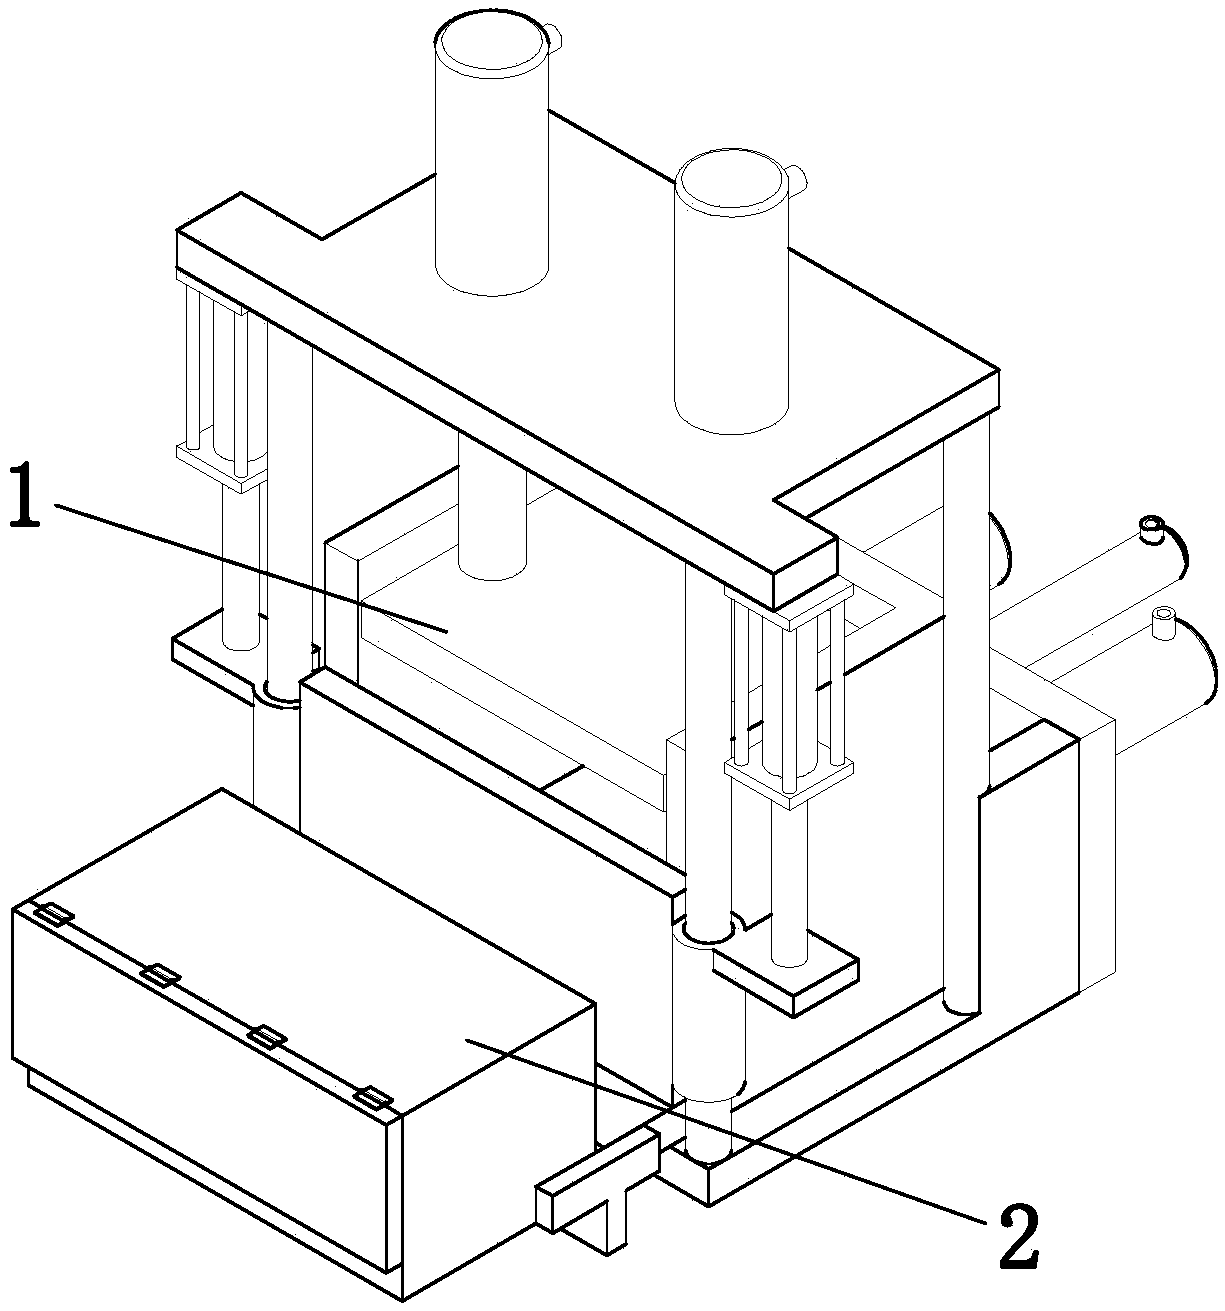 Metal waste grinding and packing device